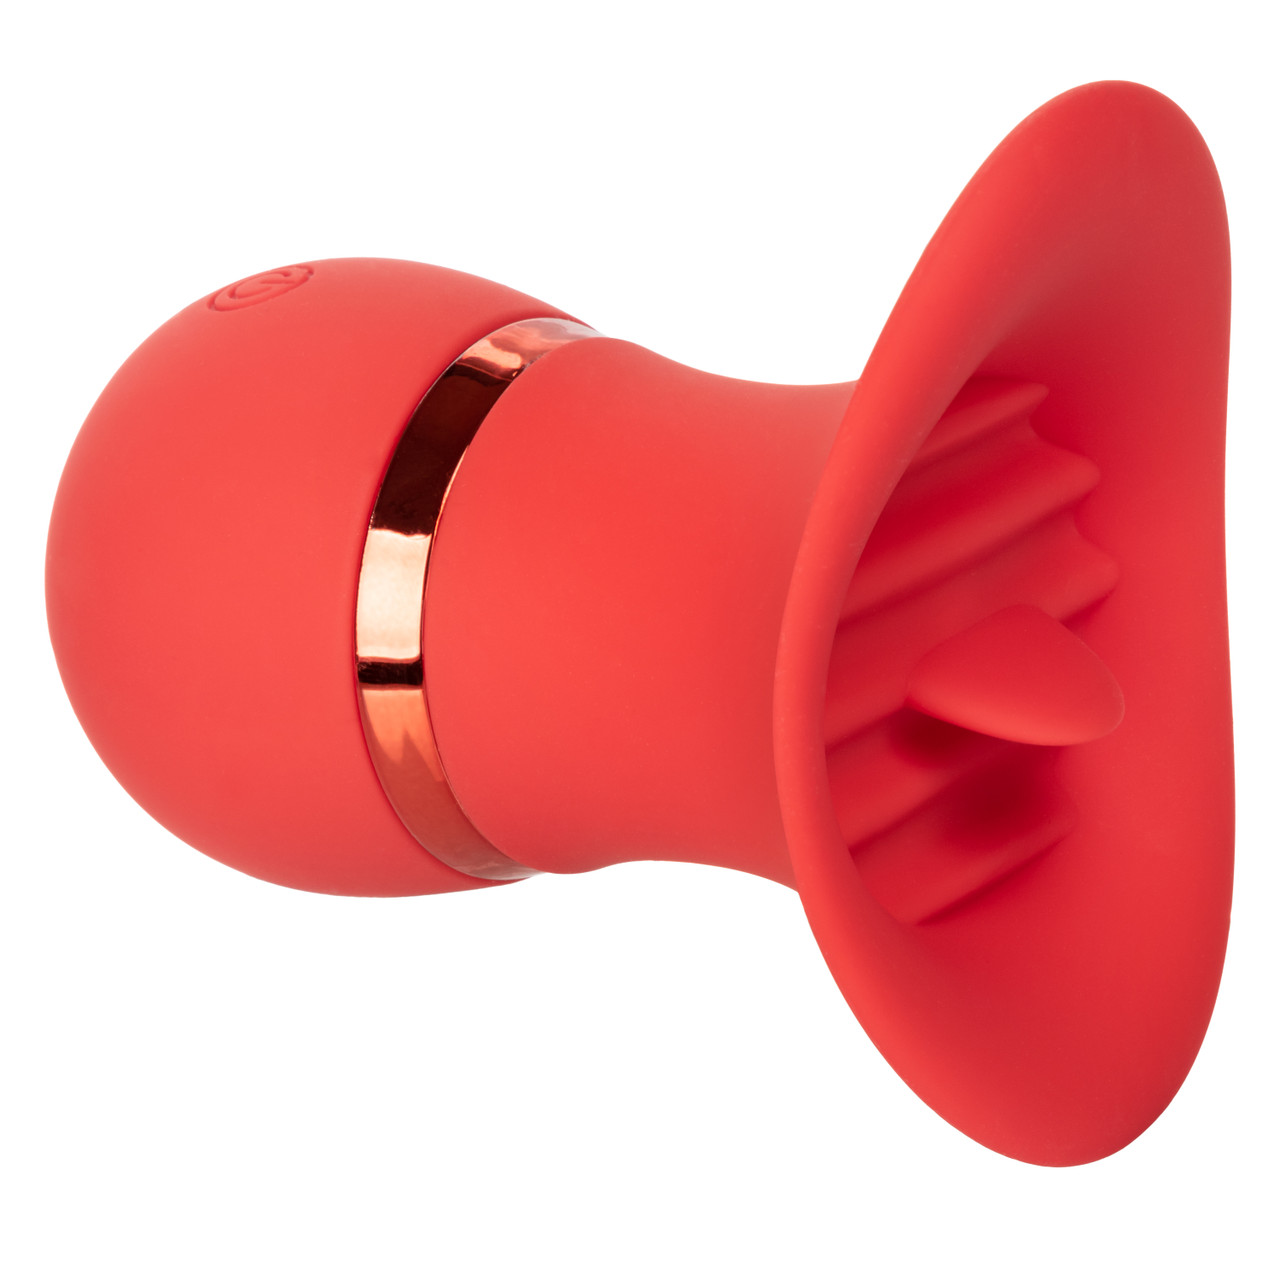 CalExotics French Kiss Suck and Play Interchangeable Set - Premium  Rechargeable Travel Size Suction Vibrator - Luxury Adult Sex Toy for Women-  Red